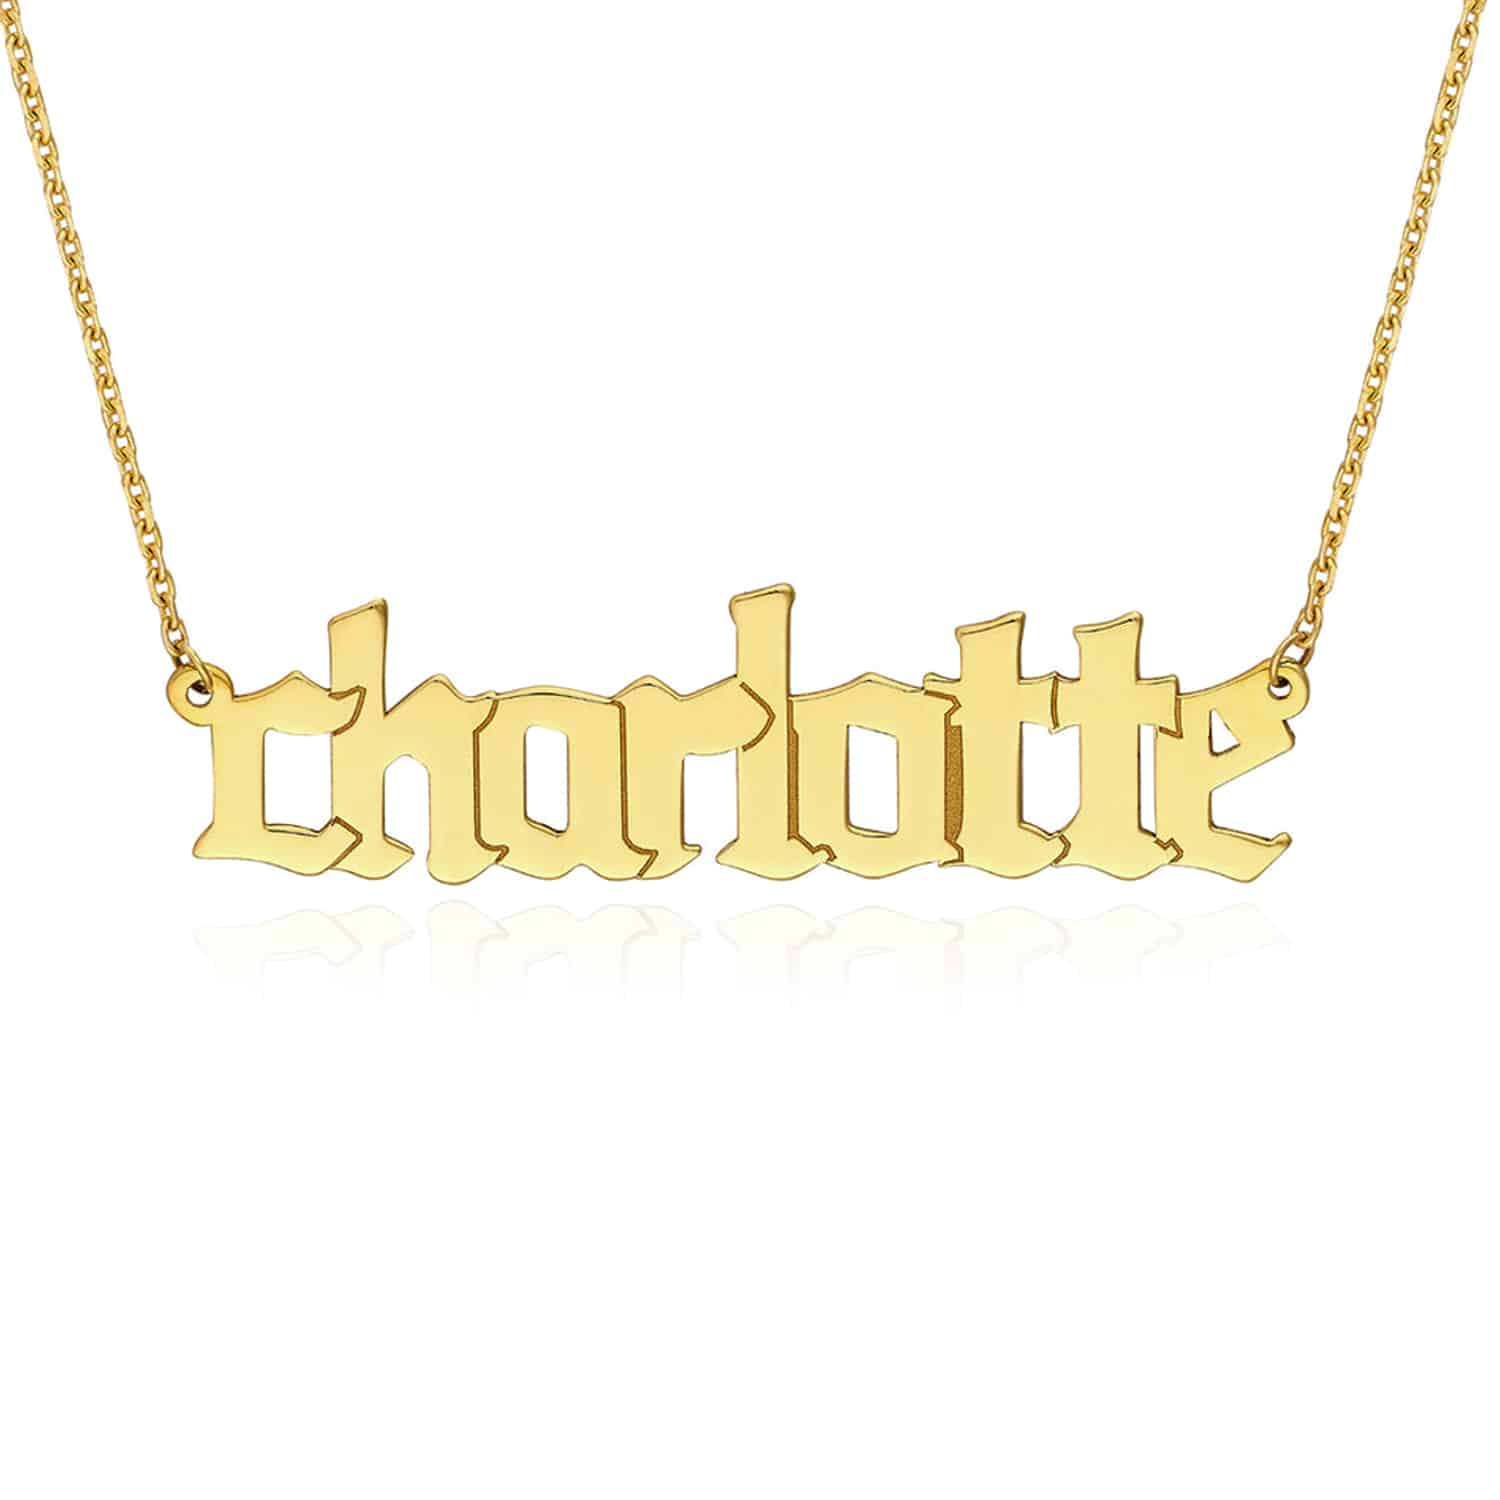 Customizable 14K Gold Yellow White Rose Gothic Nameplate Pendant Necklace 14-18" - Yellow Gold, 16"-18" Adjustable